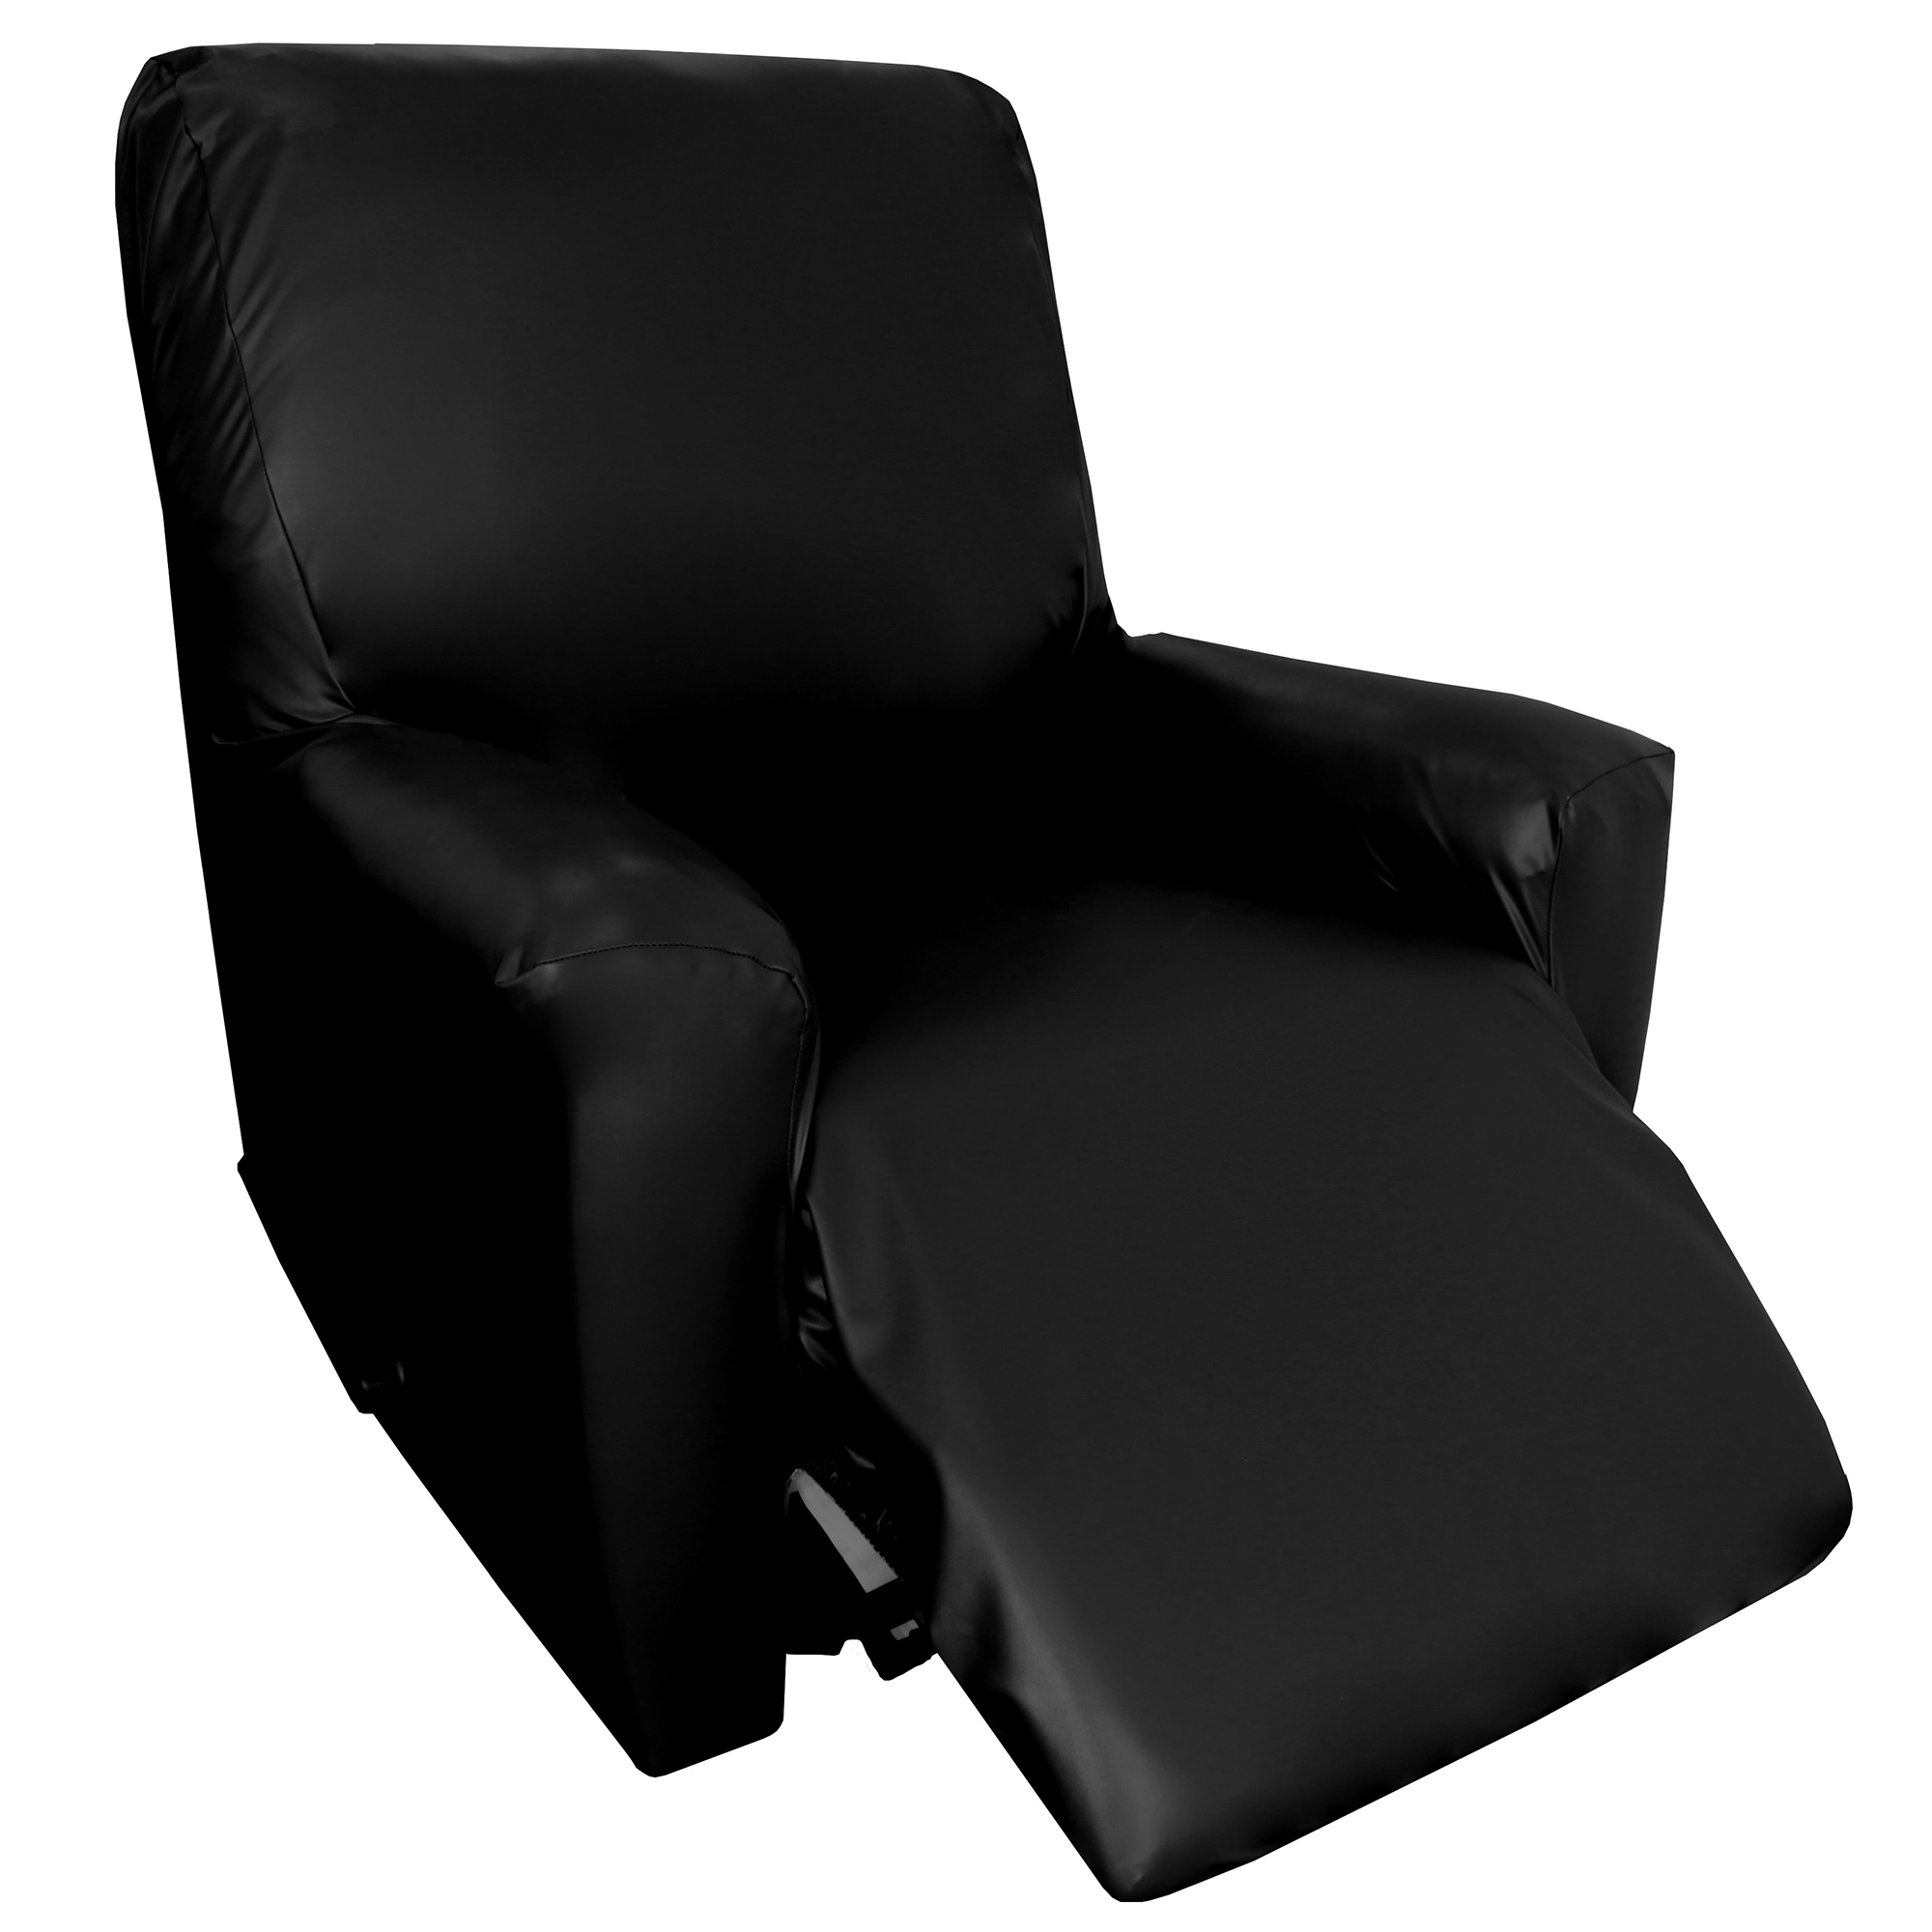 Colby Faux Leather Recliner Cover, Cover For Leather Recliner